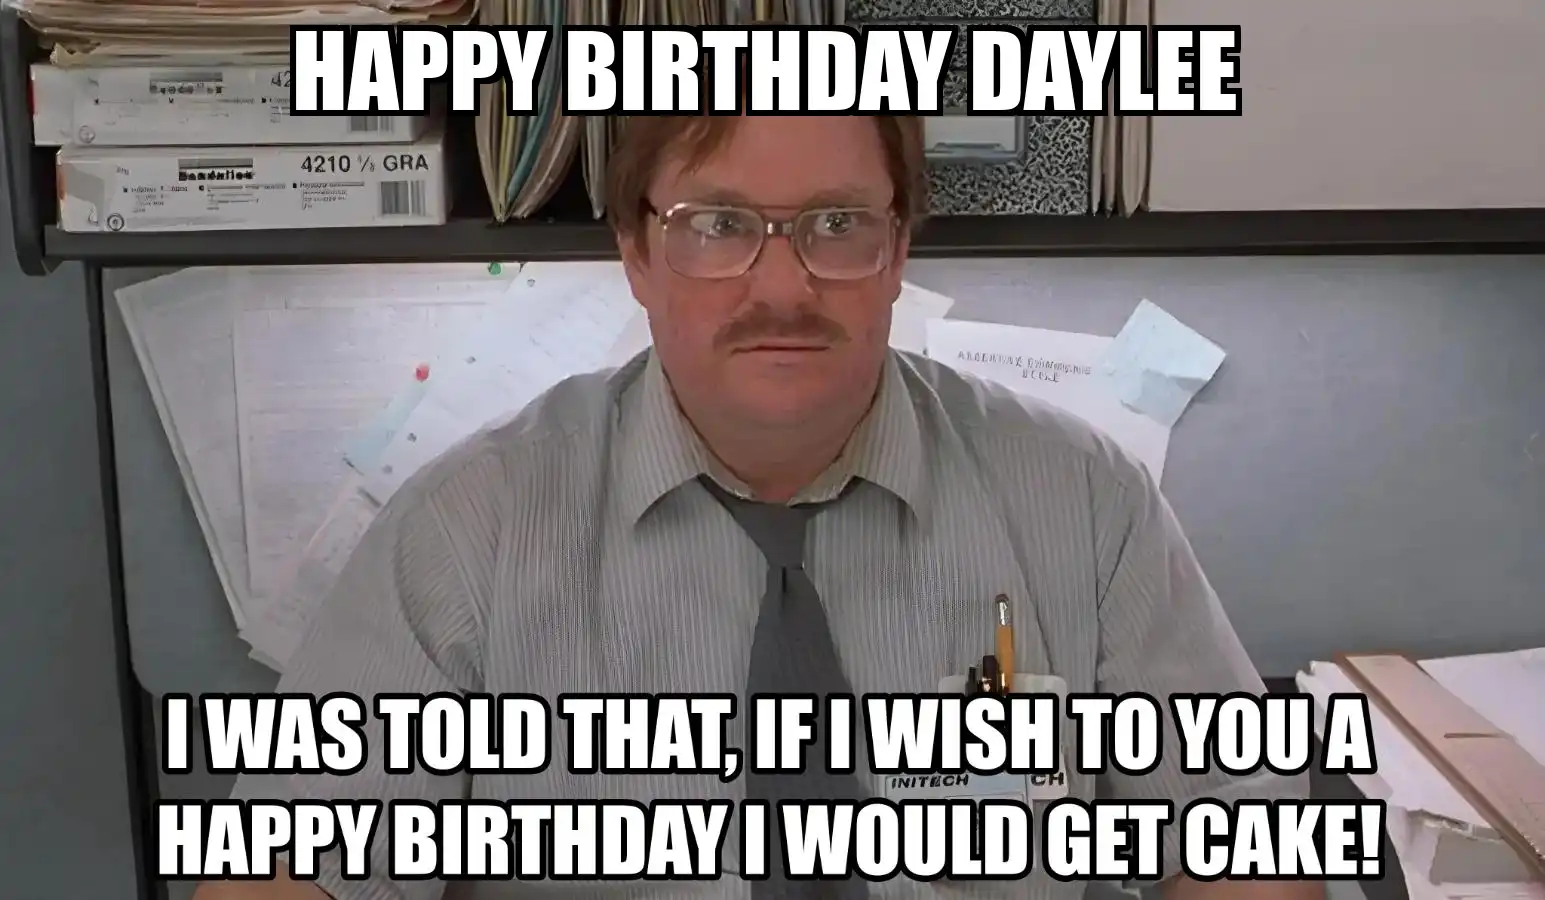 Happy Birthday Daylee I Would Get A Cake Meme